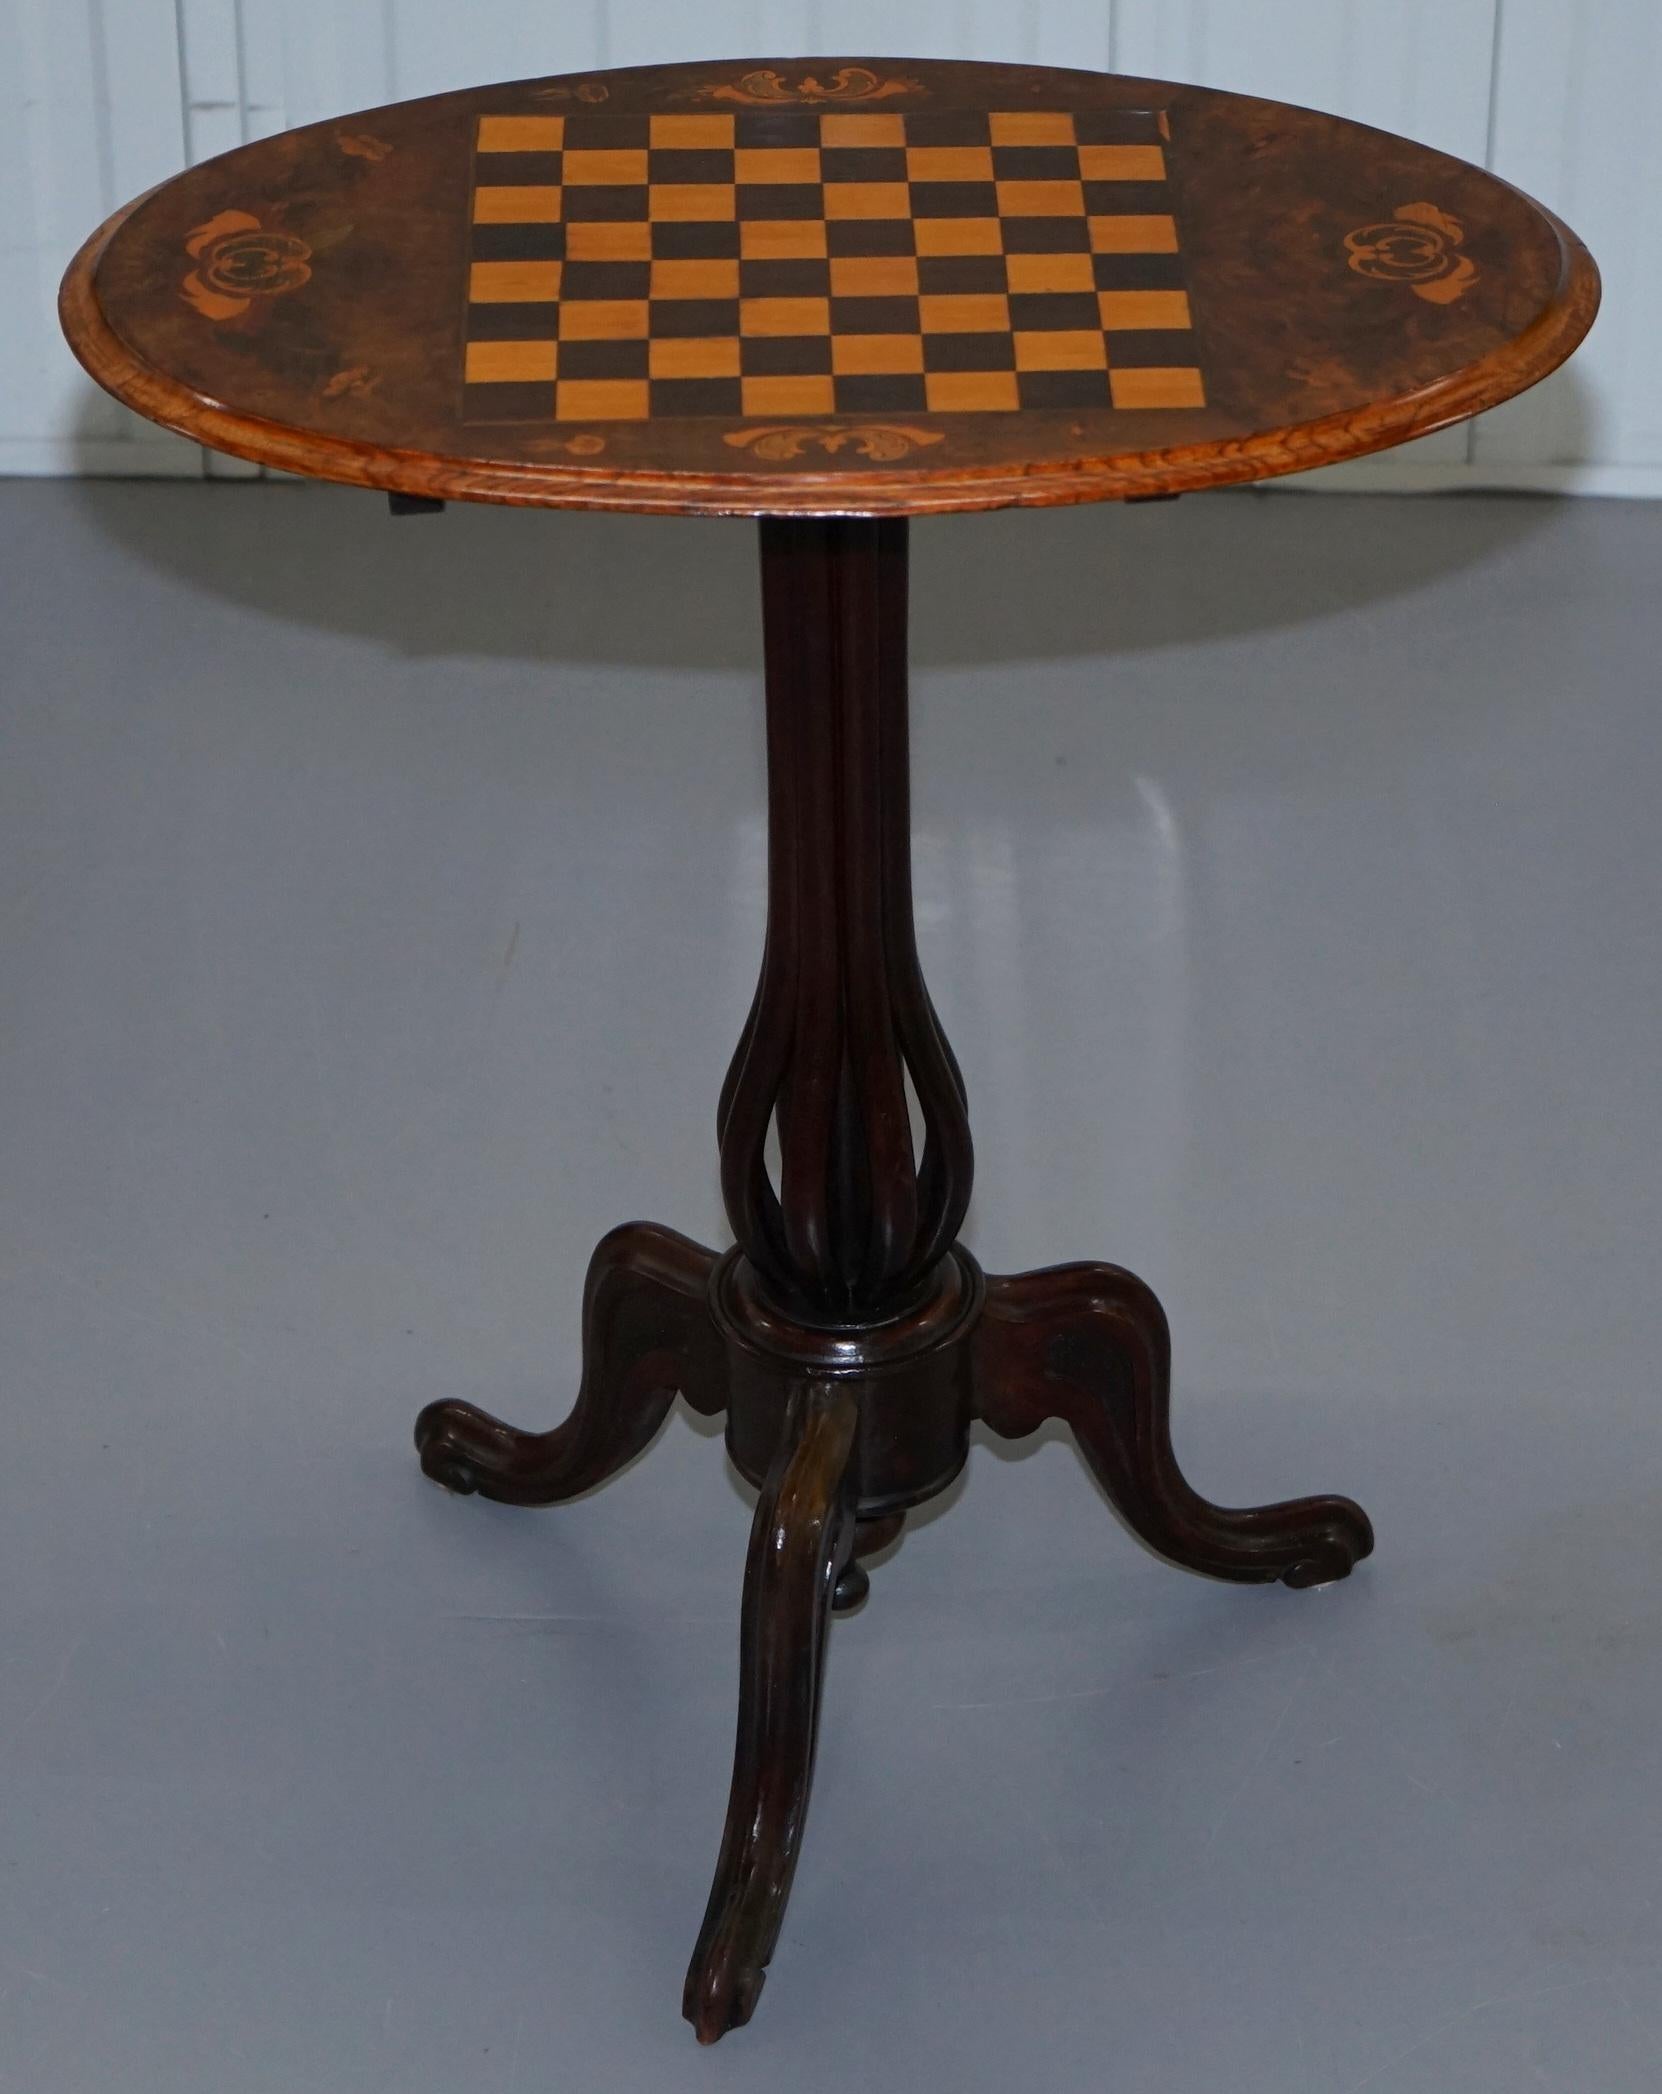 We are delighted to offer for sale this lovely Victorian 1880 walnut marquetry inlaid tilt-top chess games table

A very good looking well made and function piece of furniture, extremely decorative, the top has gorgeous Walnut timber which is